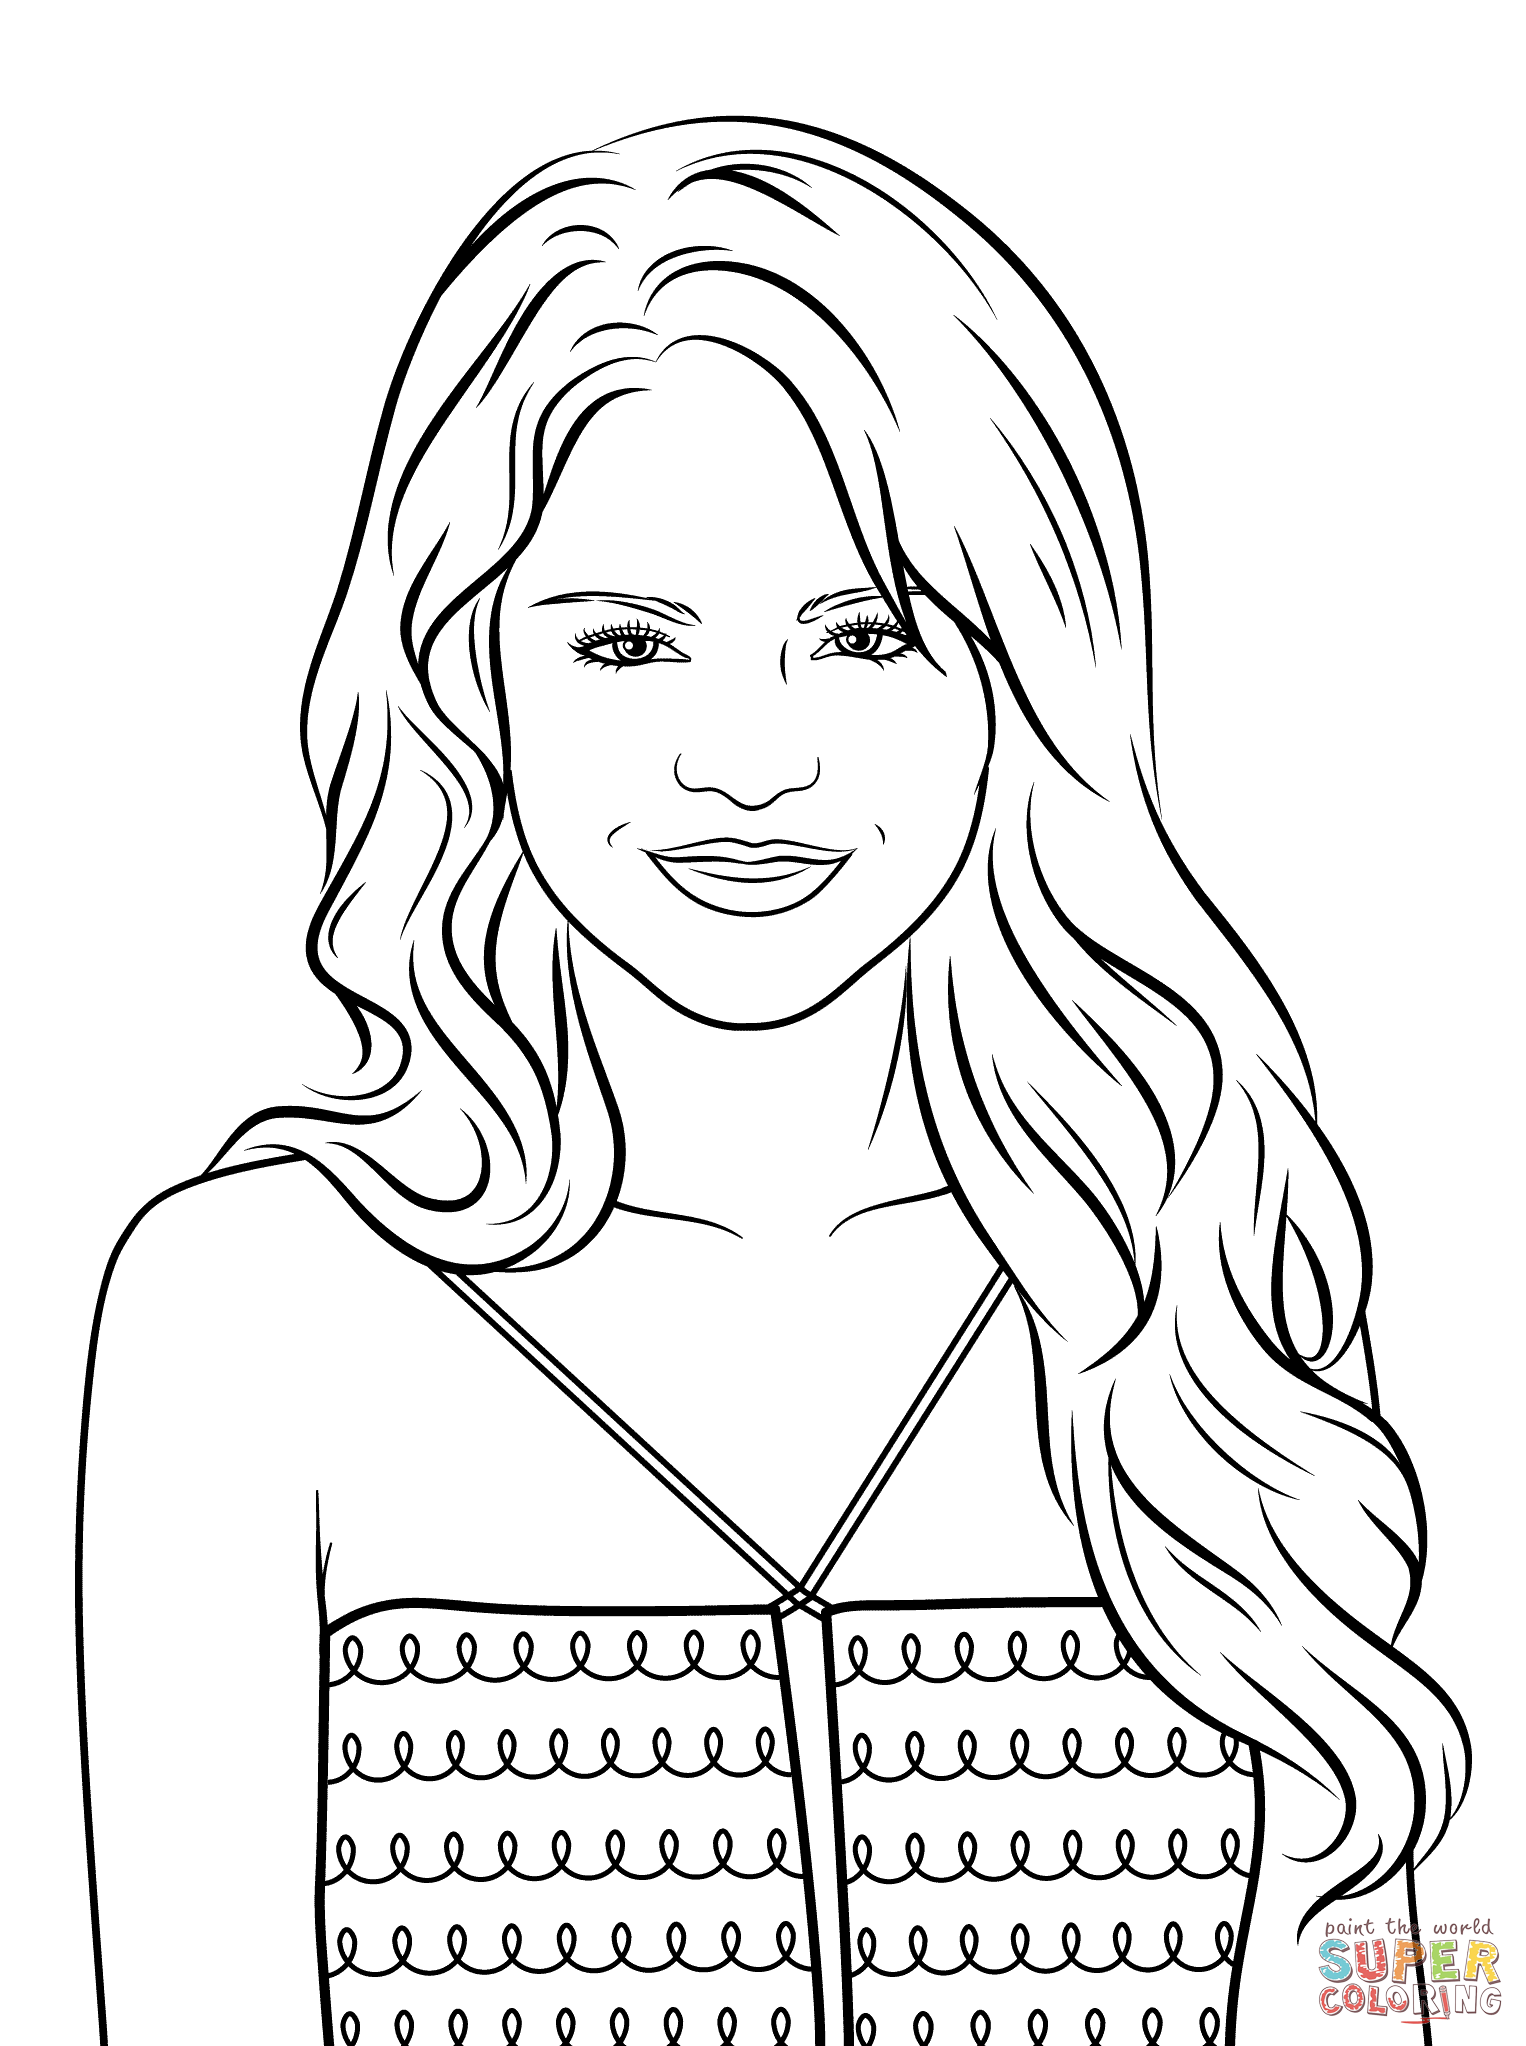 Selena gomez coloring page free printable coloring pages